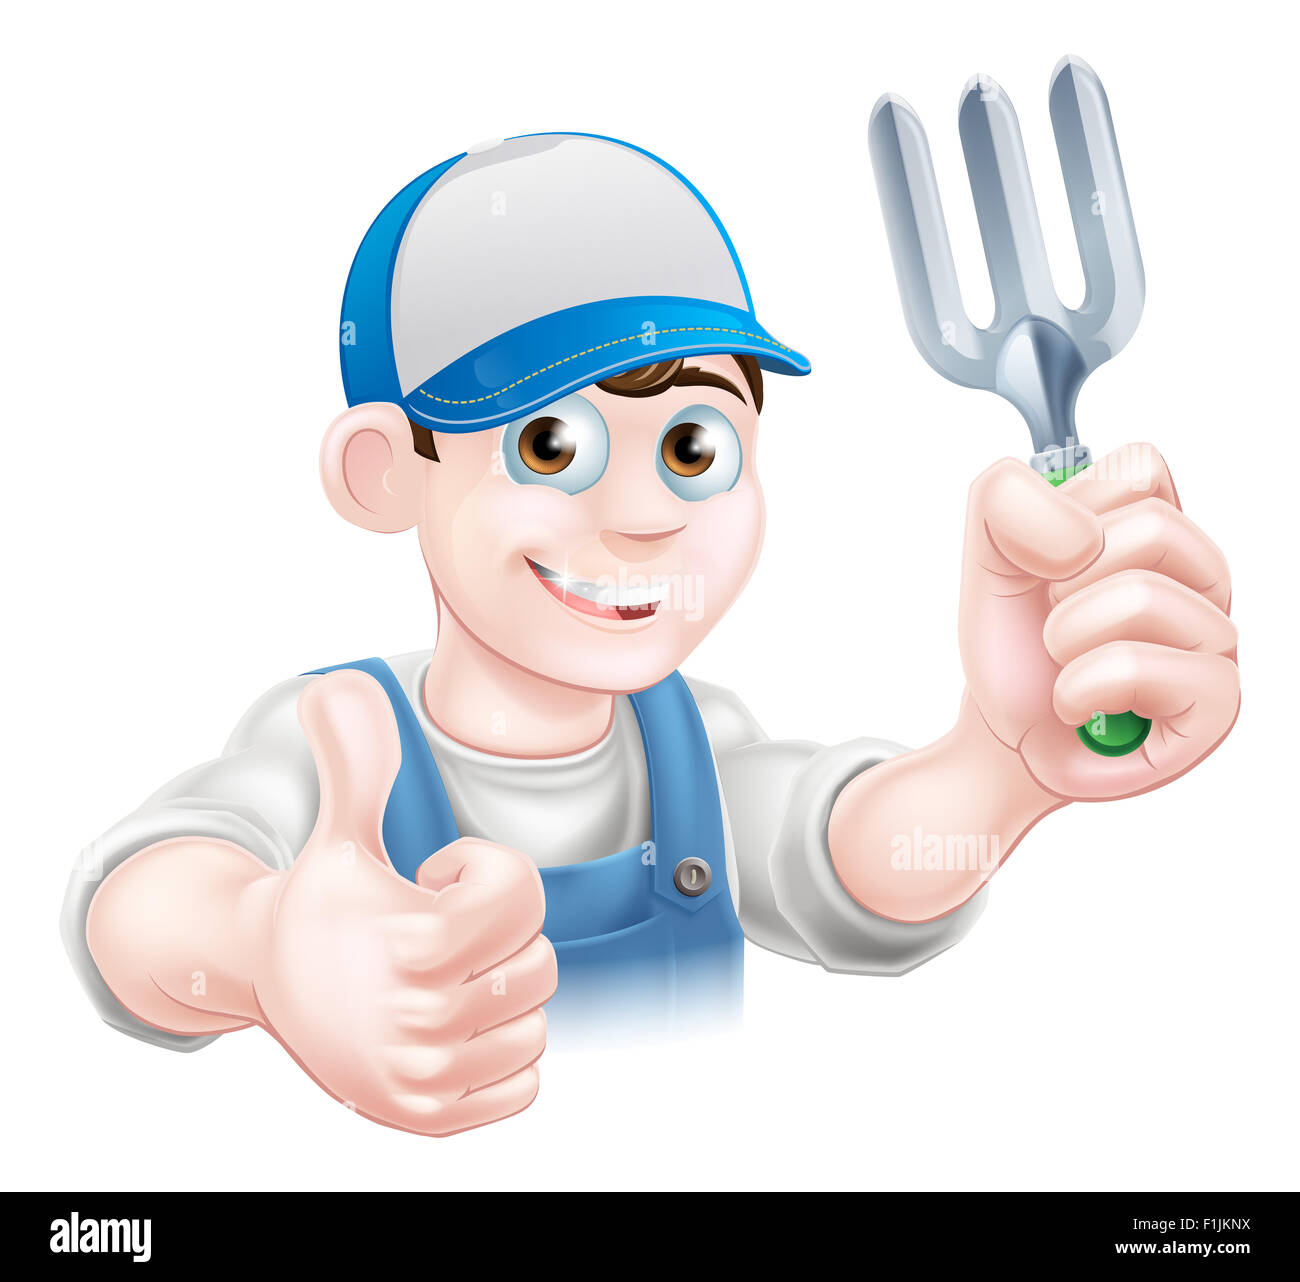 A cartoon gardener character holding a garden fork and giving a thumbs up Stock Photo